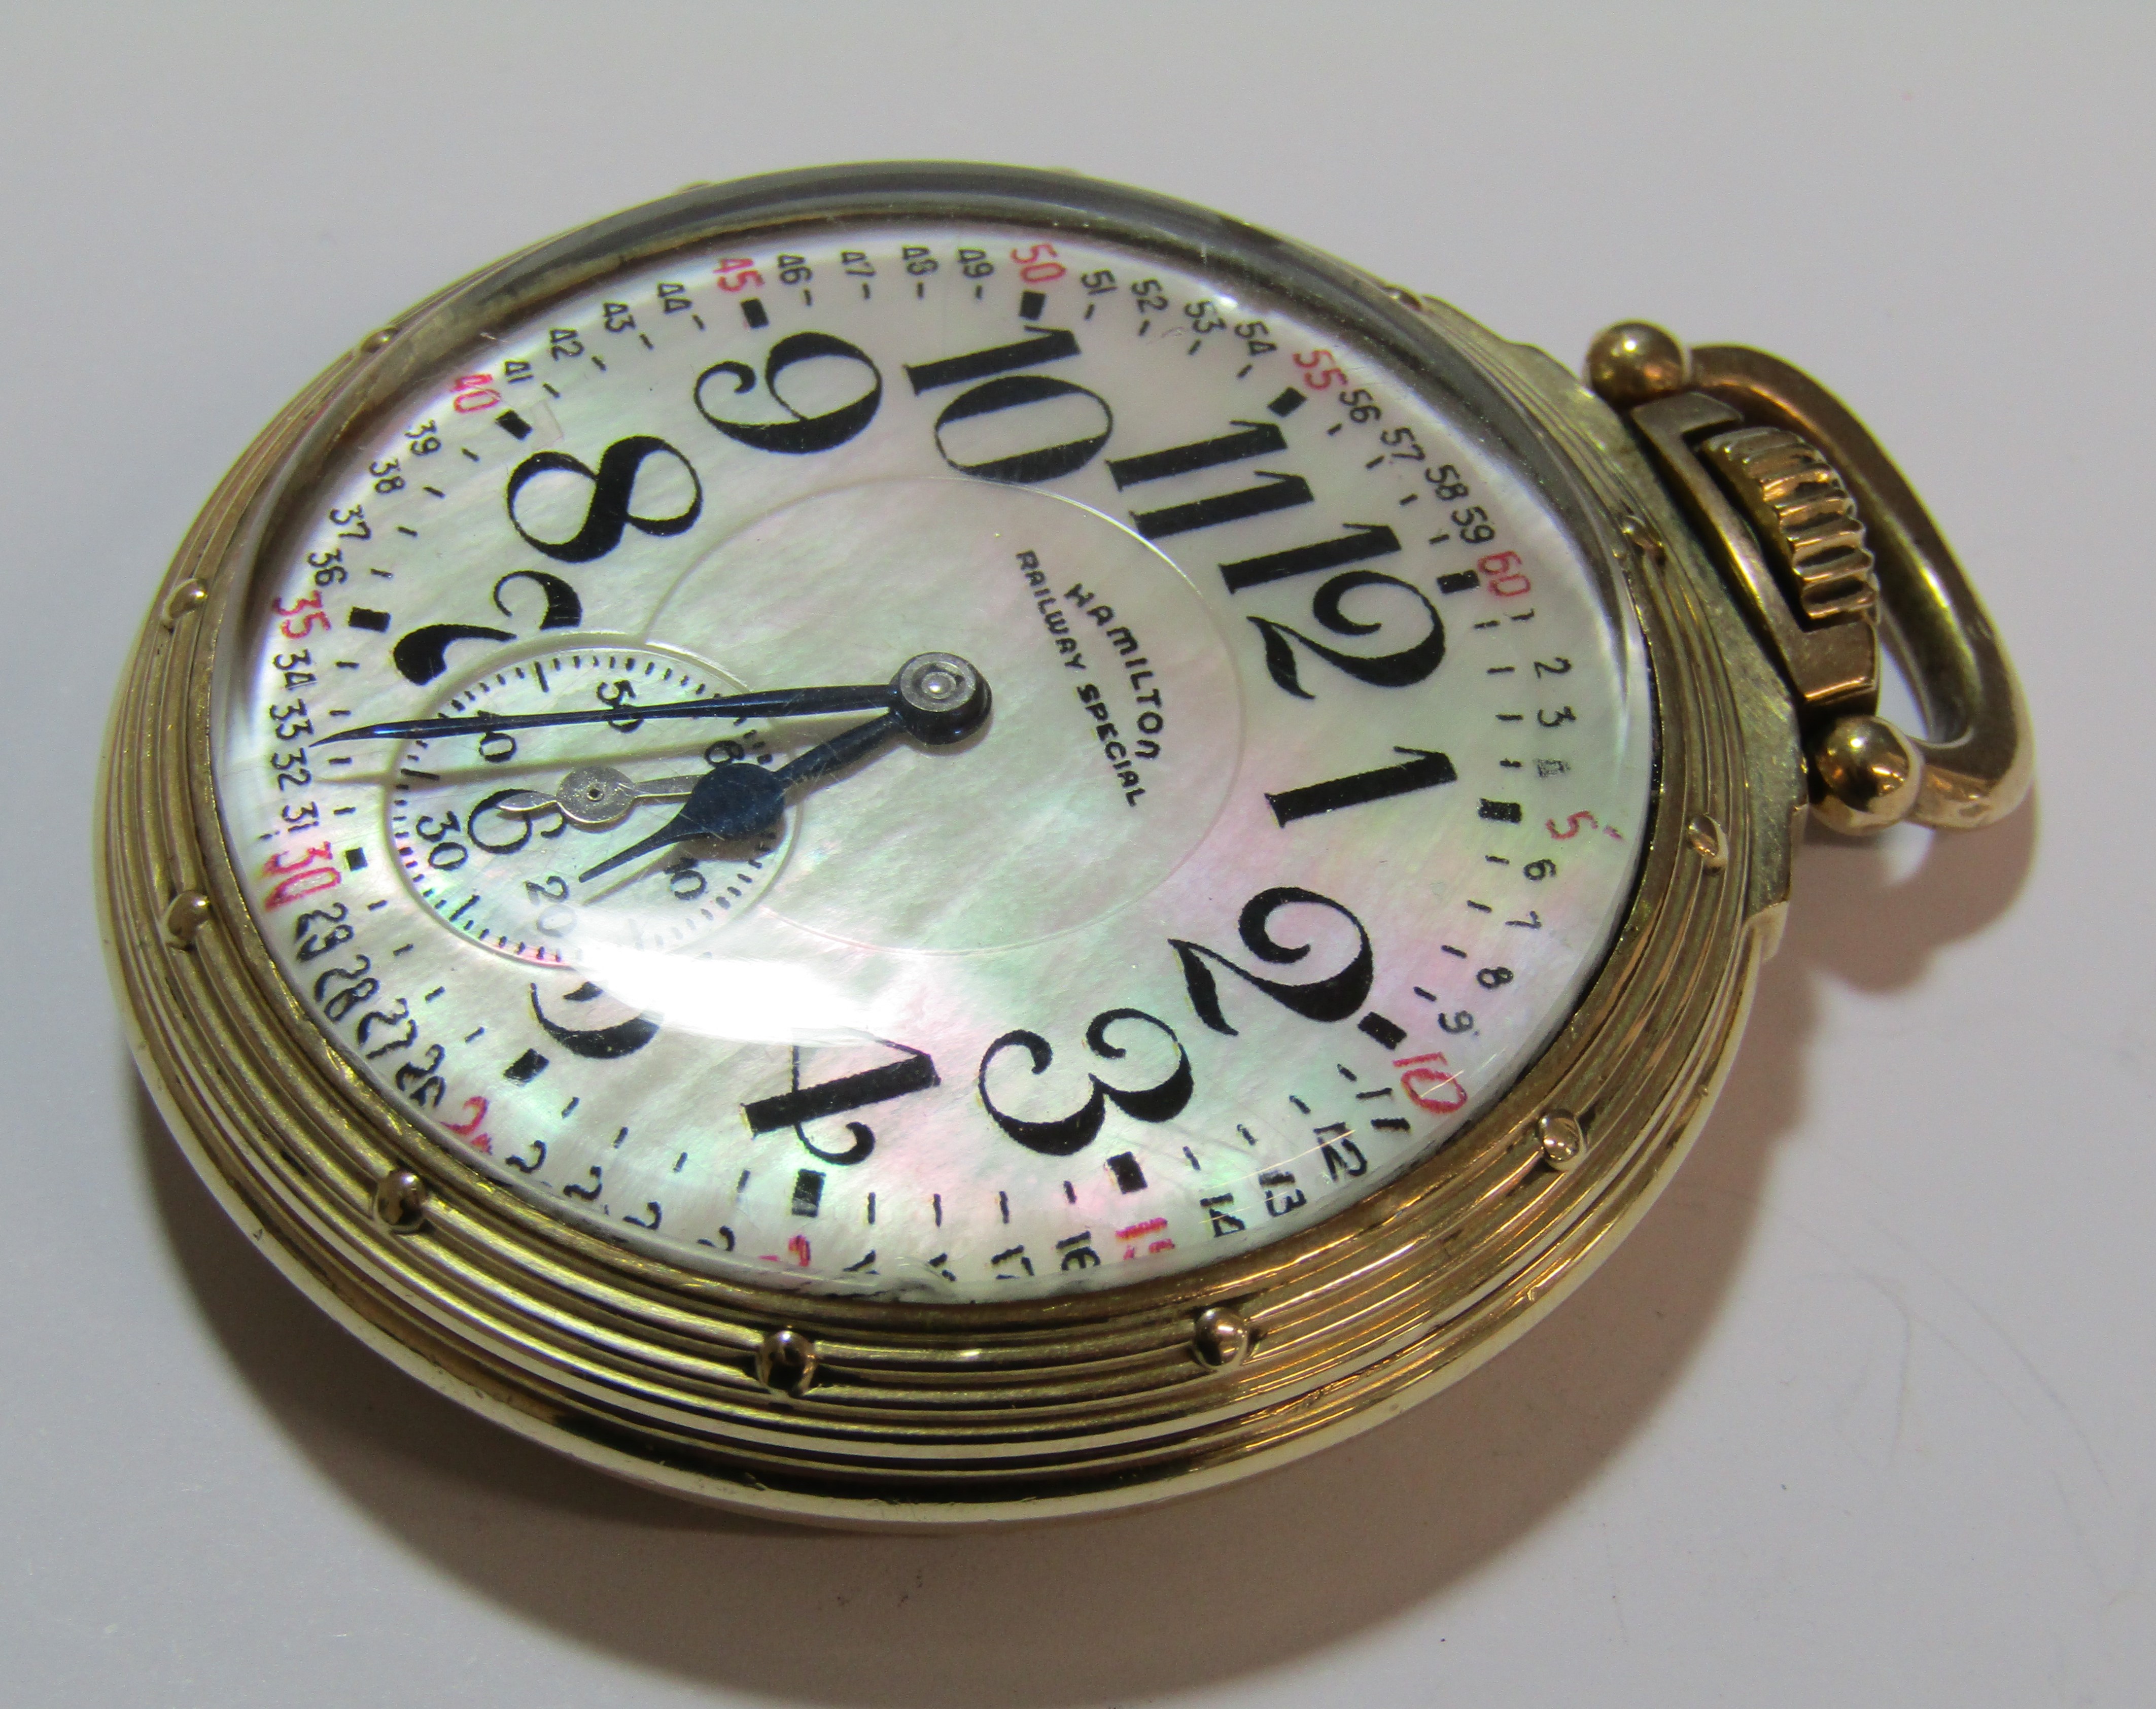 Hamilton Railway special 992B pocket watch - 21 jewels - Montgomery dial - pearl face - 10K gold - Image 4 of 10